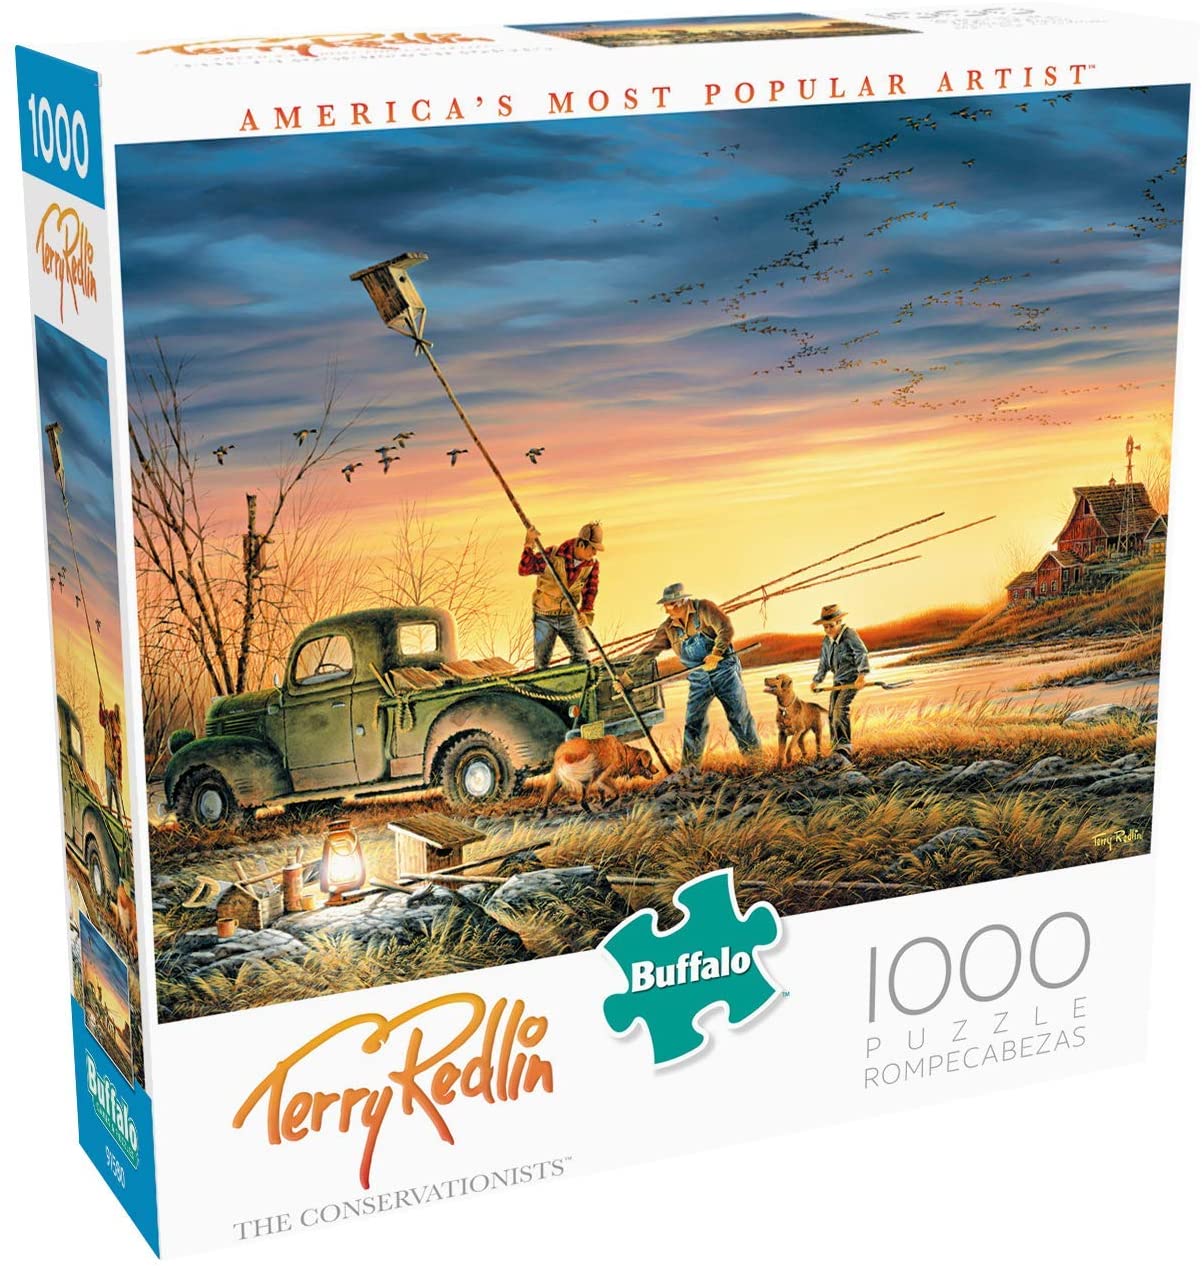 1000-Piece Buffalo Games Terry Redlin The Conservationists Jigsaw Puzzle $7.21 + FS w/ Amazon Prime or FS on $25+